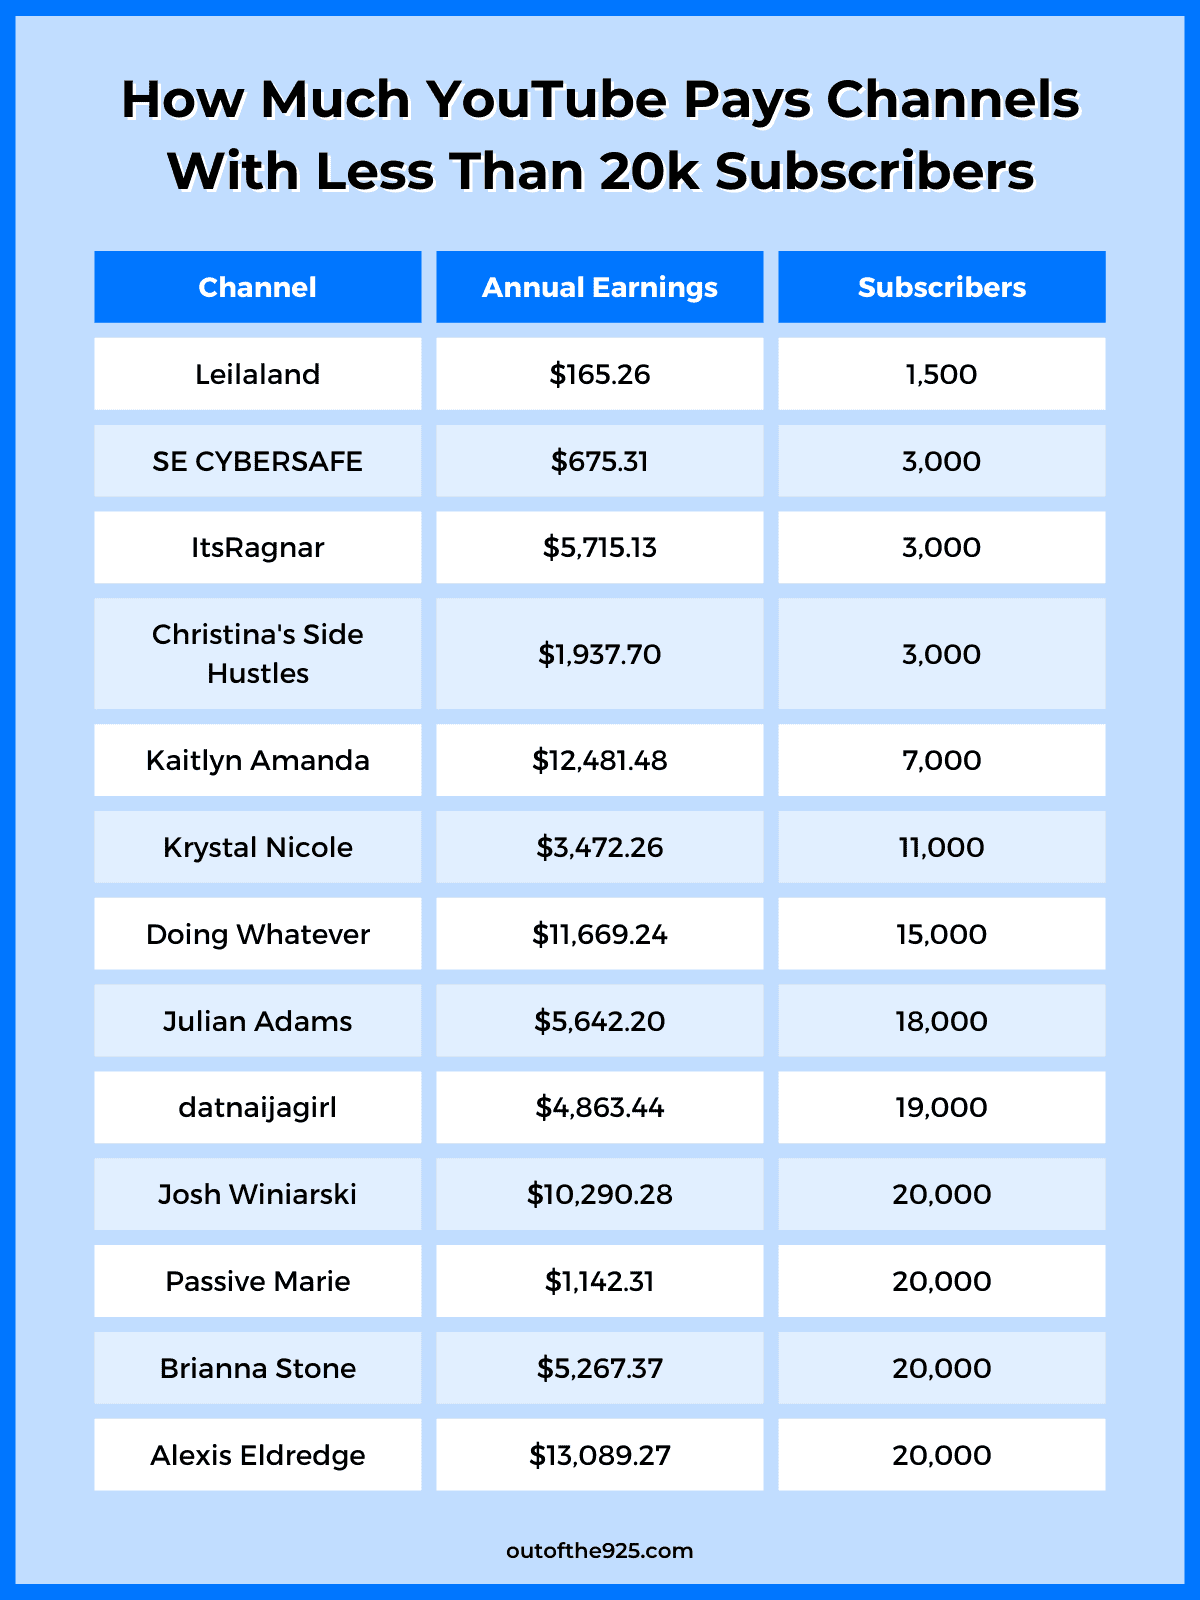 How Much Youtube Pays Channels With Less Than 20K Subscribers